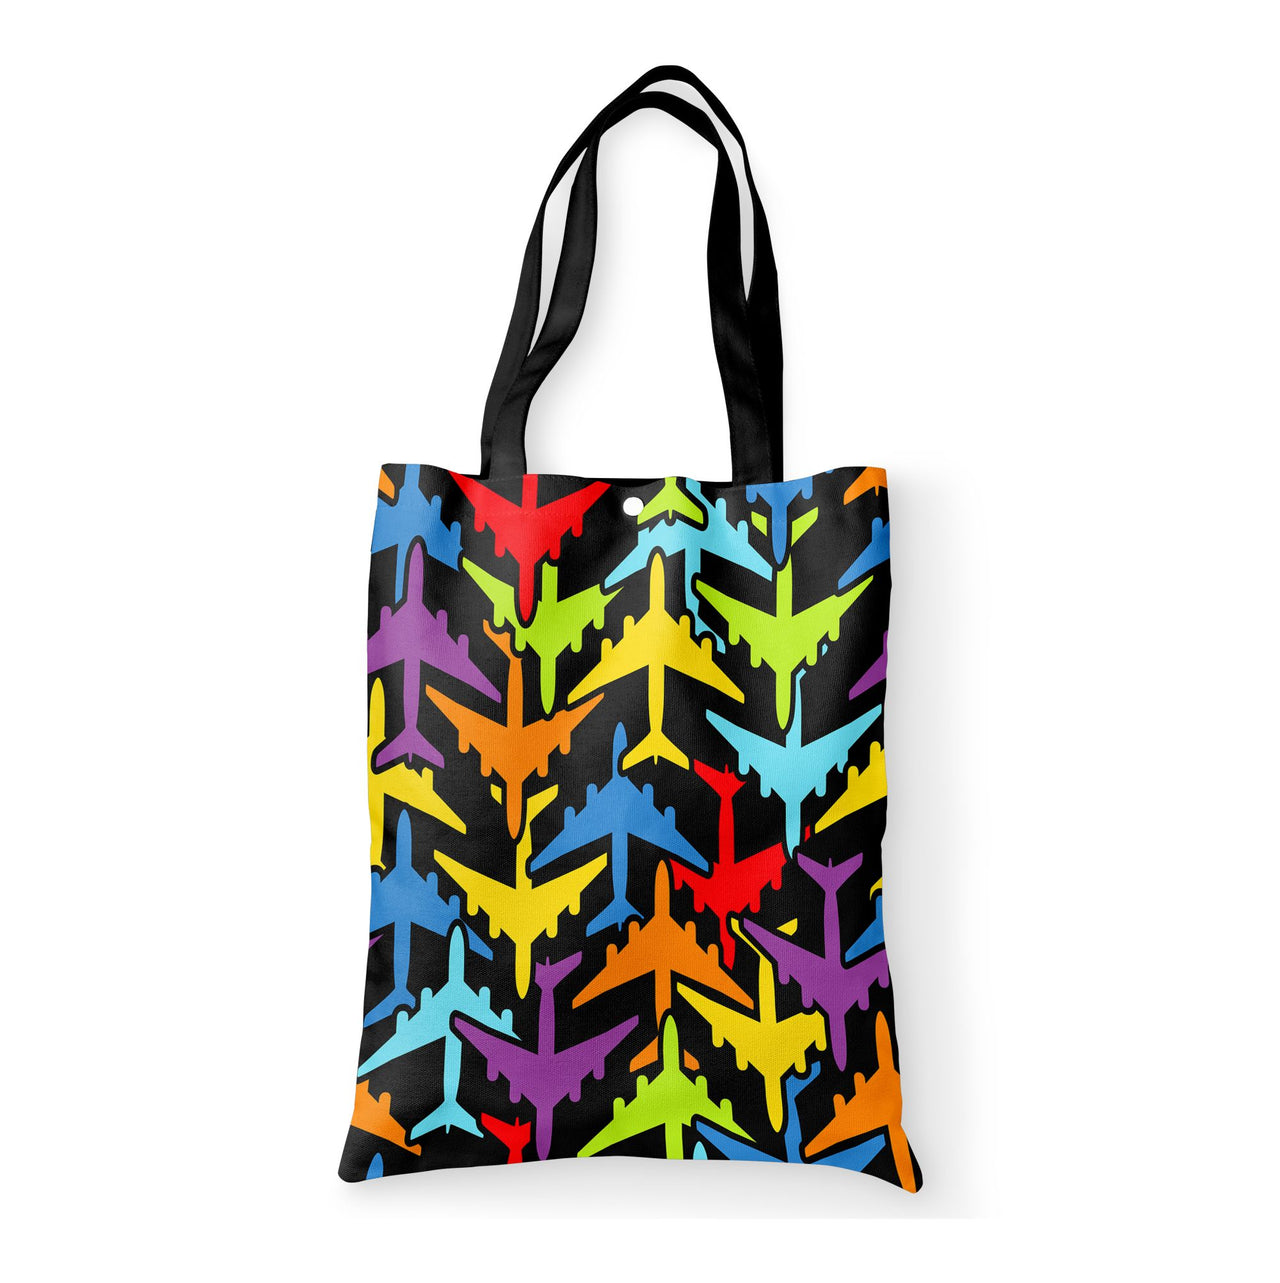 Super Colourful Airplanes Designed Tote Bags